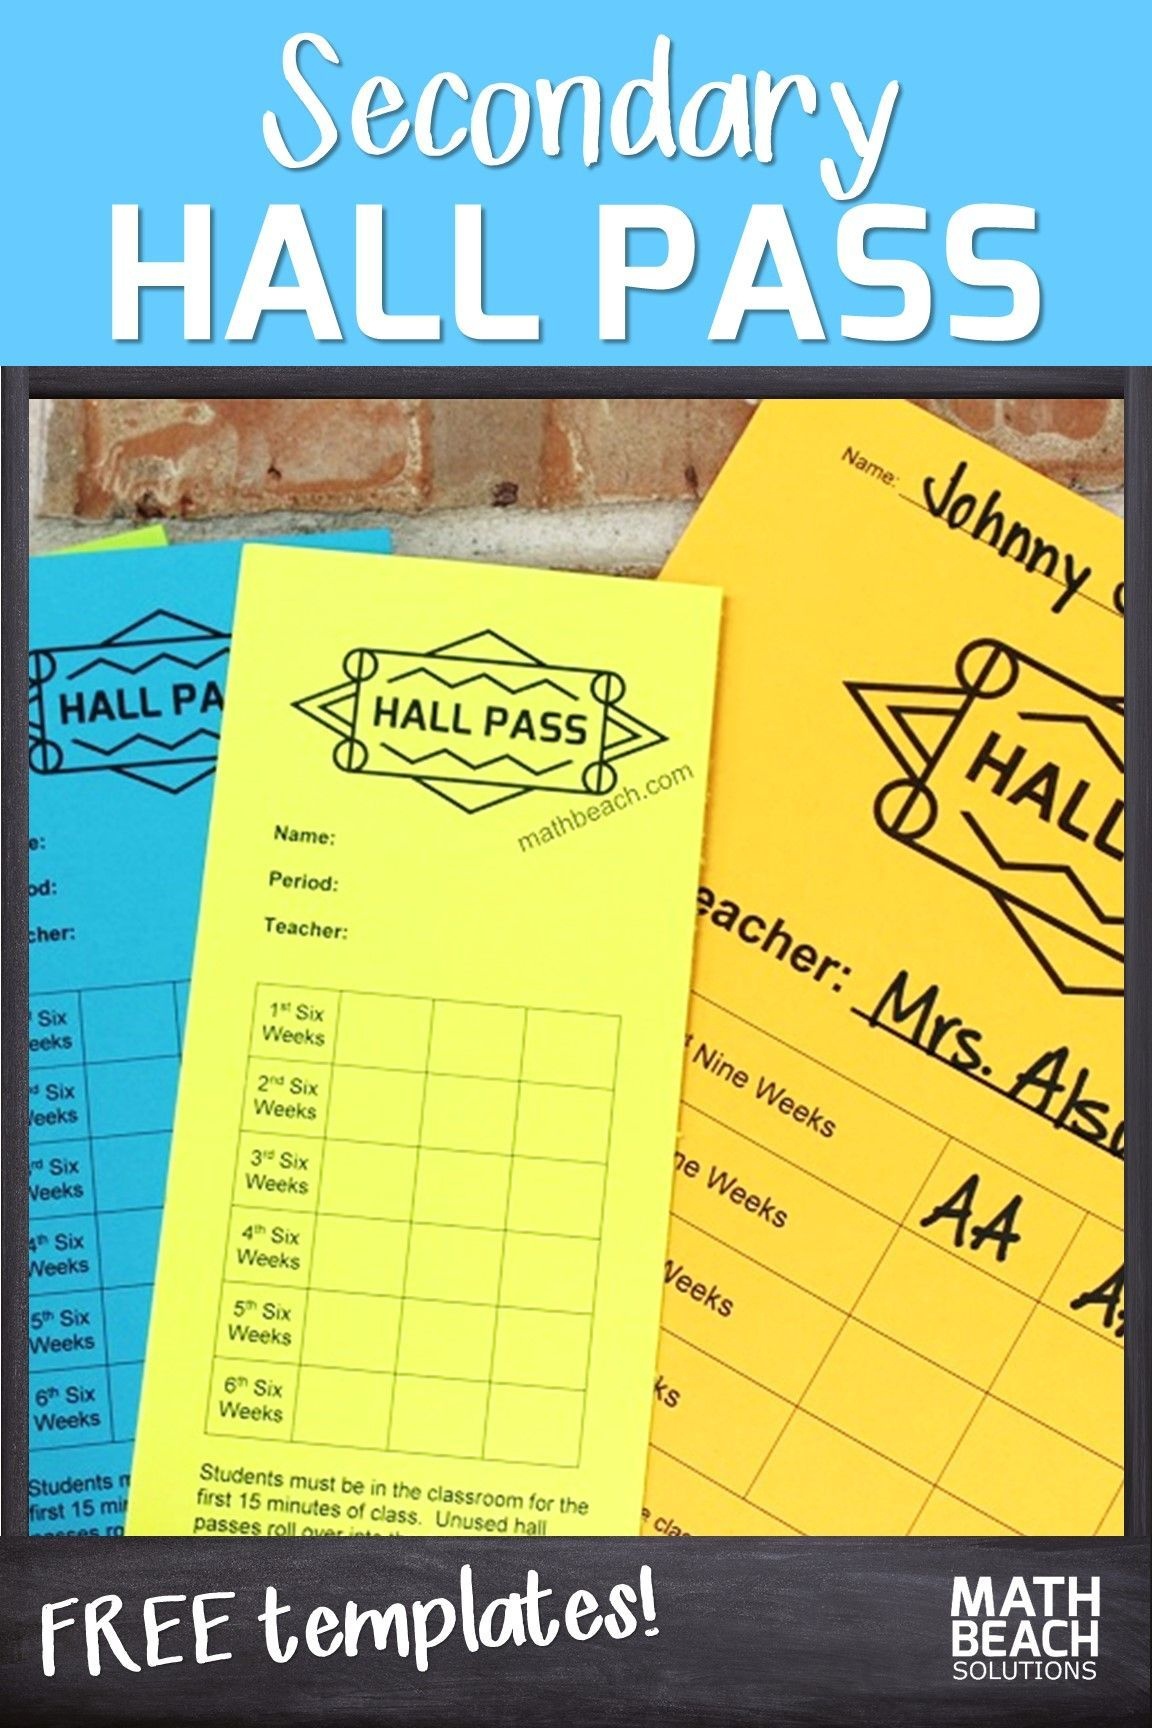 Hall Passes Elementary Middle School Free Classroom Activities Free